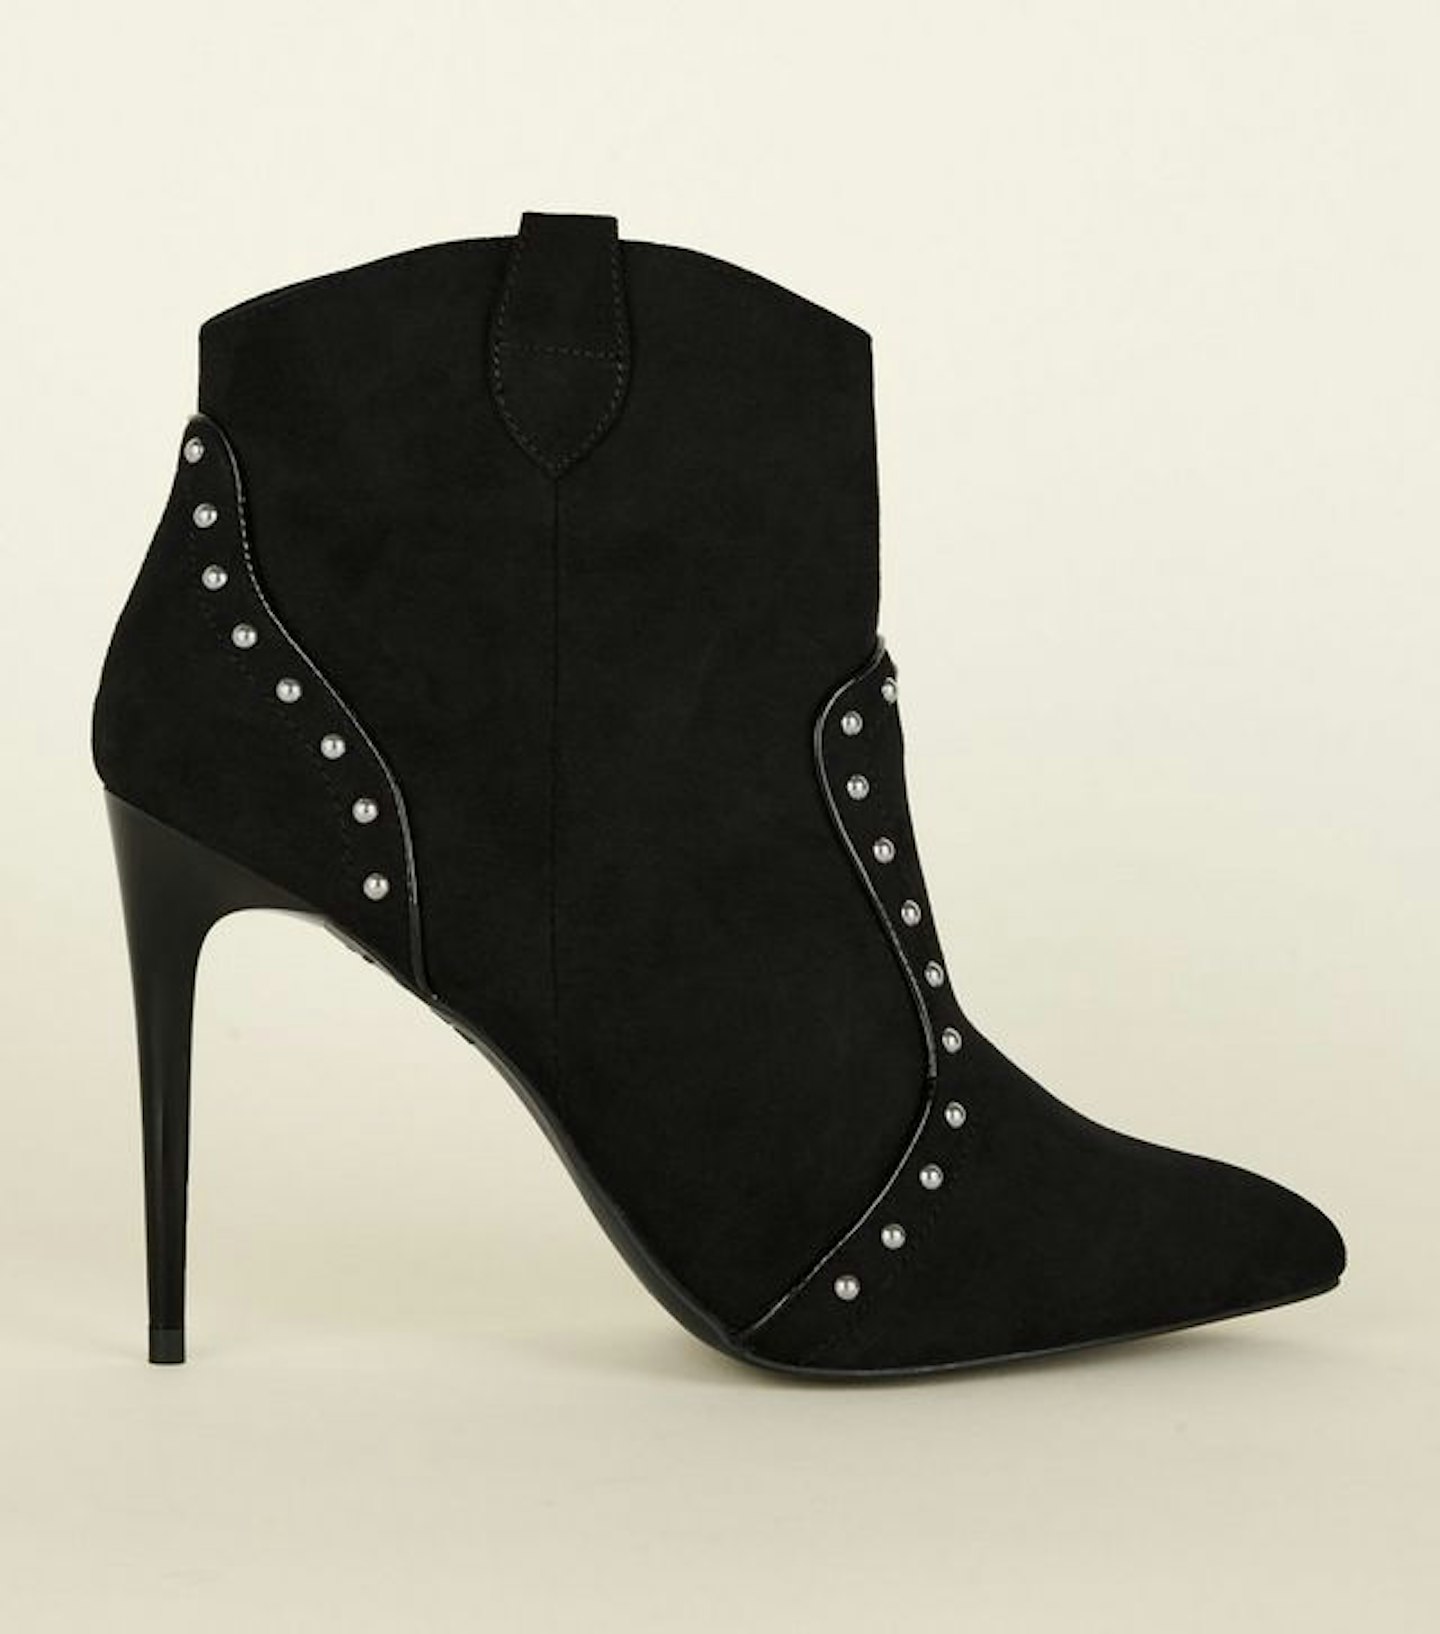 New Look, Black Studded Stiletto Ankle Boots, £34.99